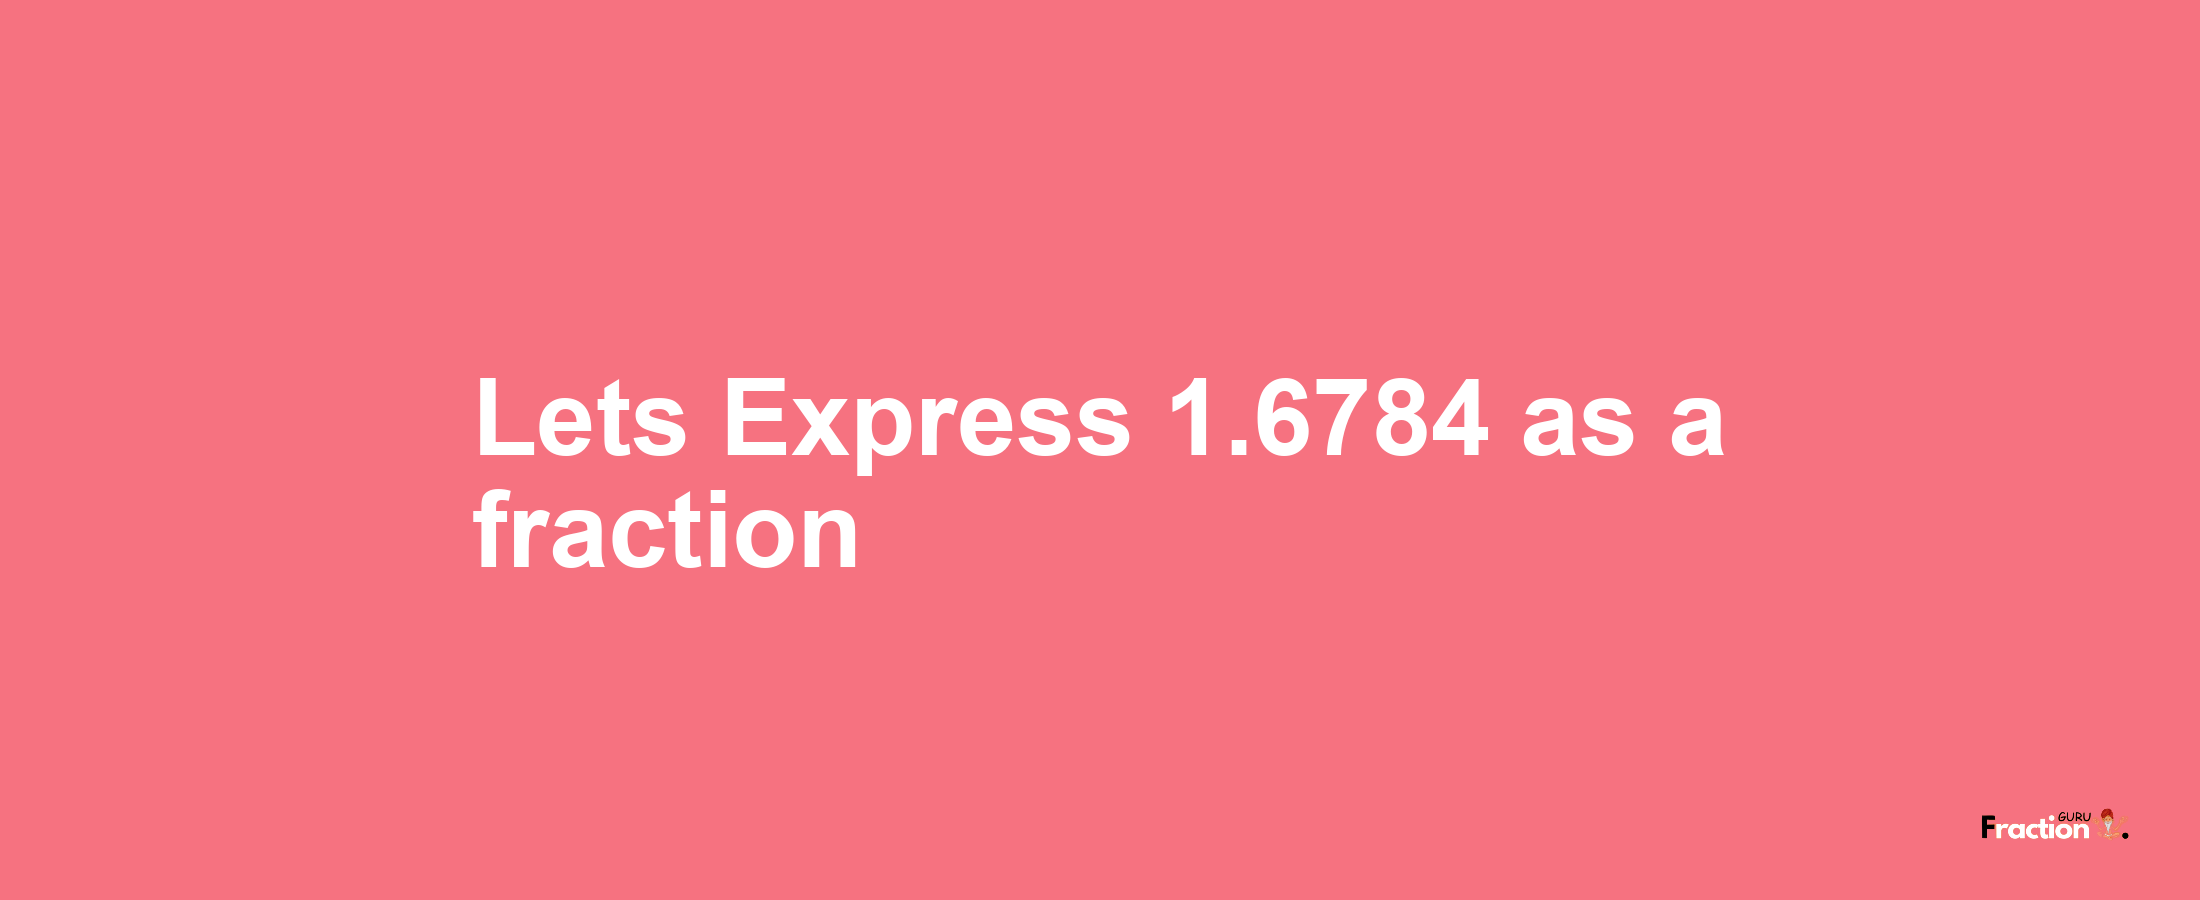 Lets Express 1.6784 as afraction